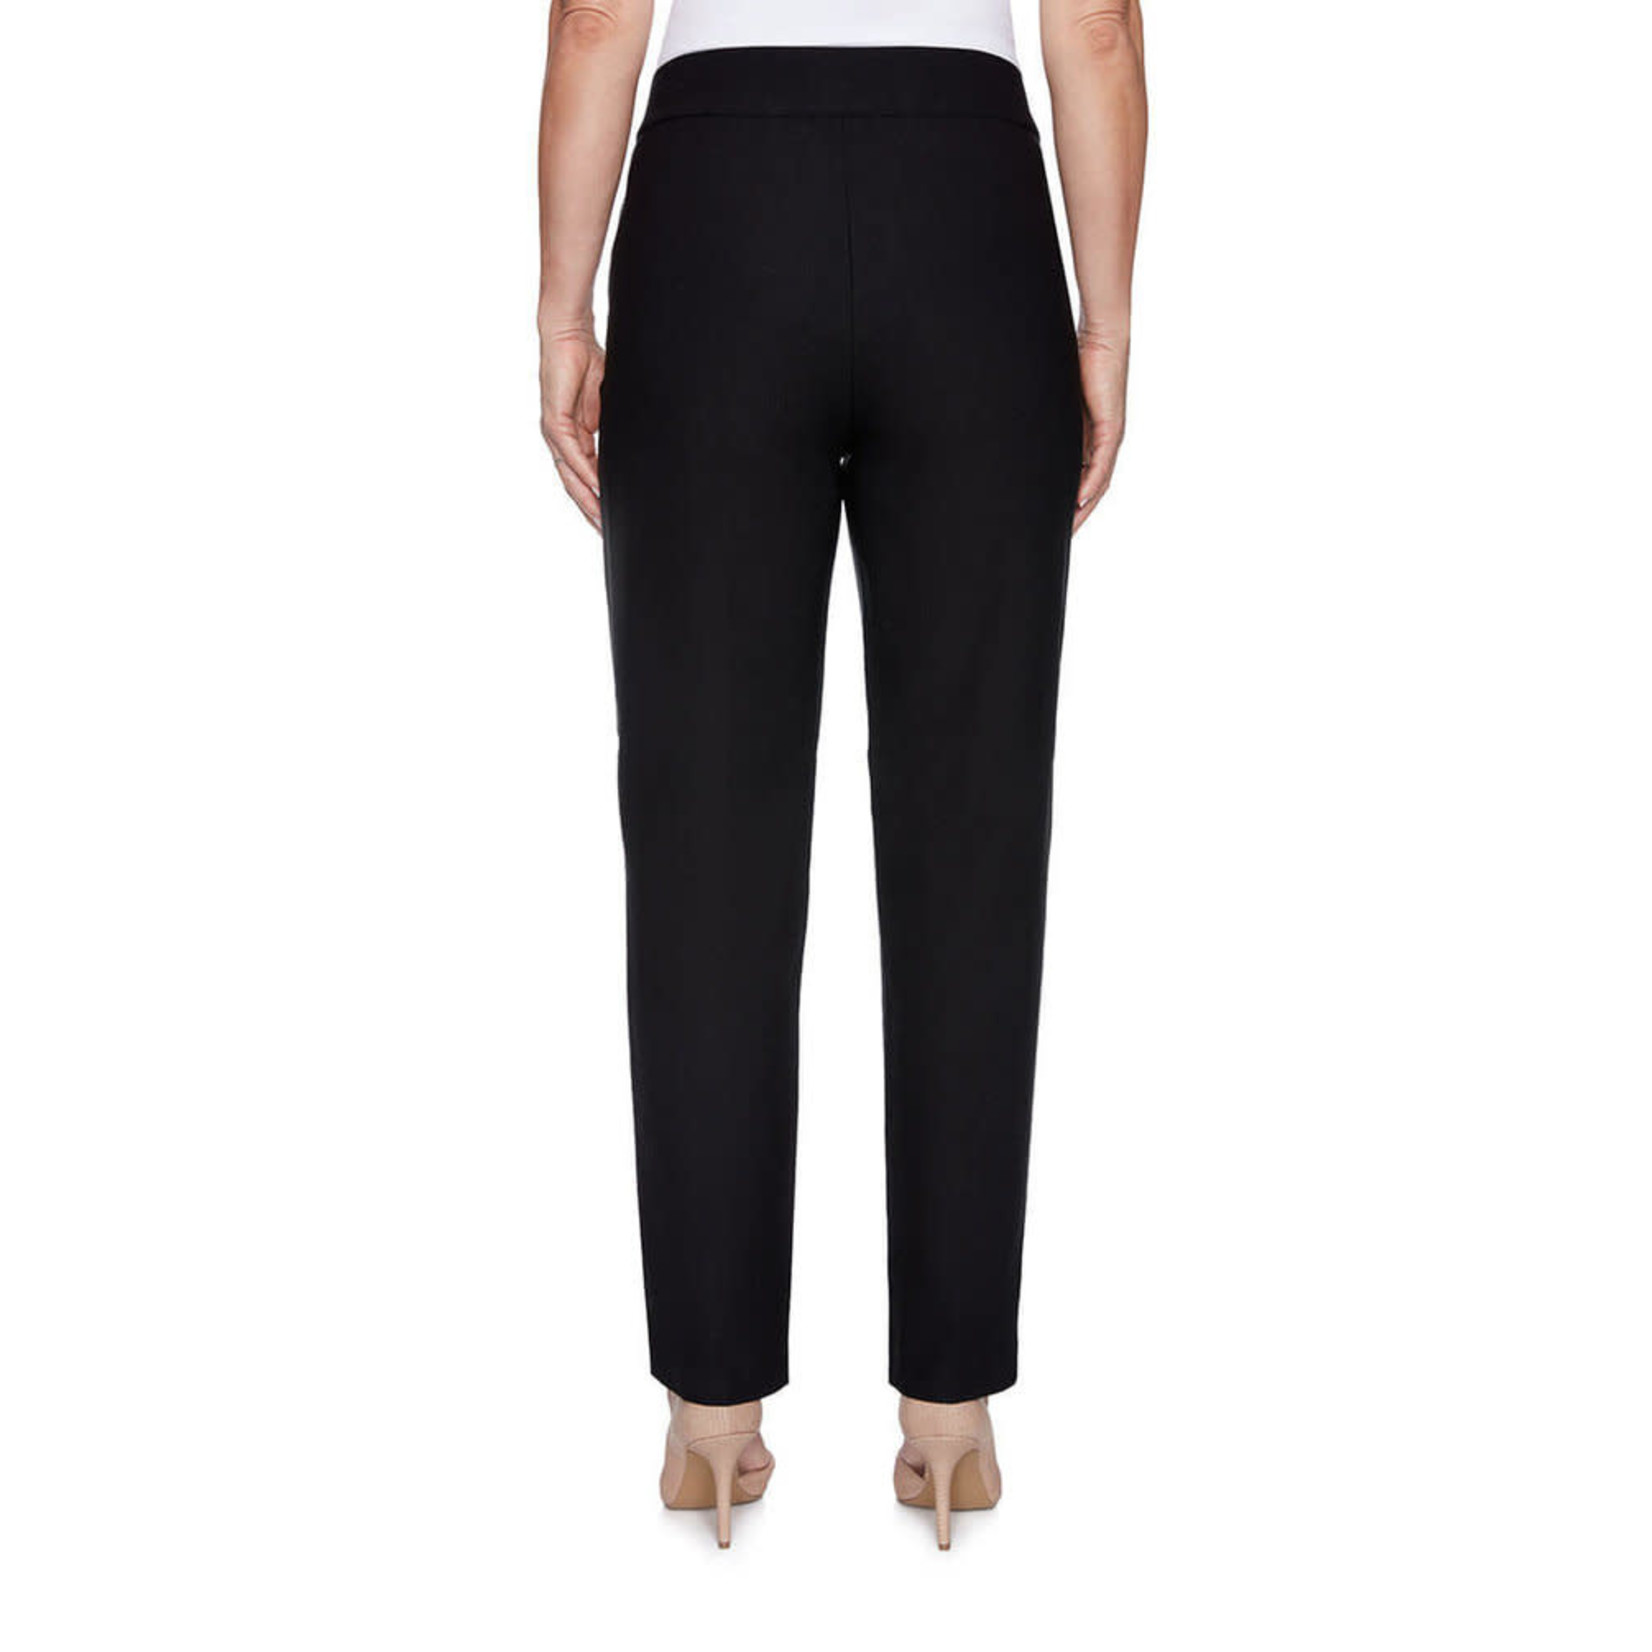 Alfred Dunner Allure Stretch Pant Petite